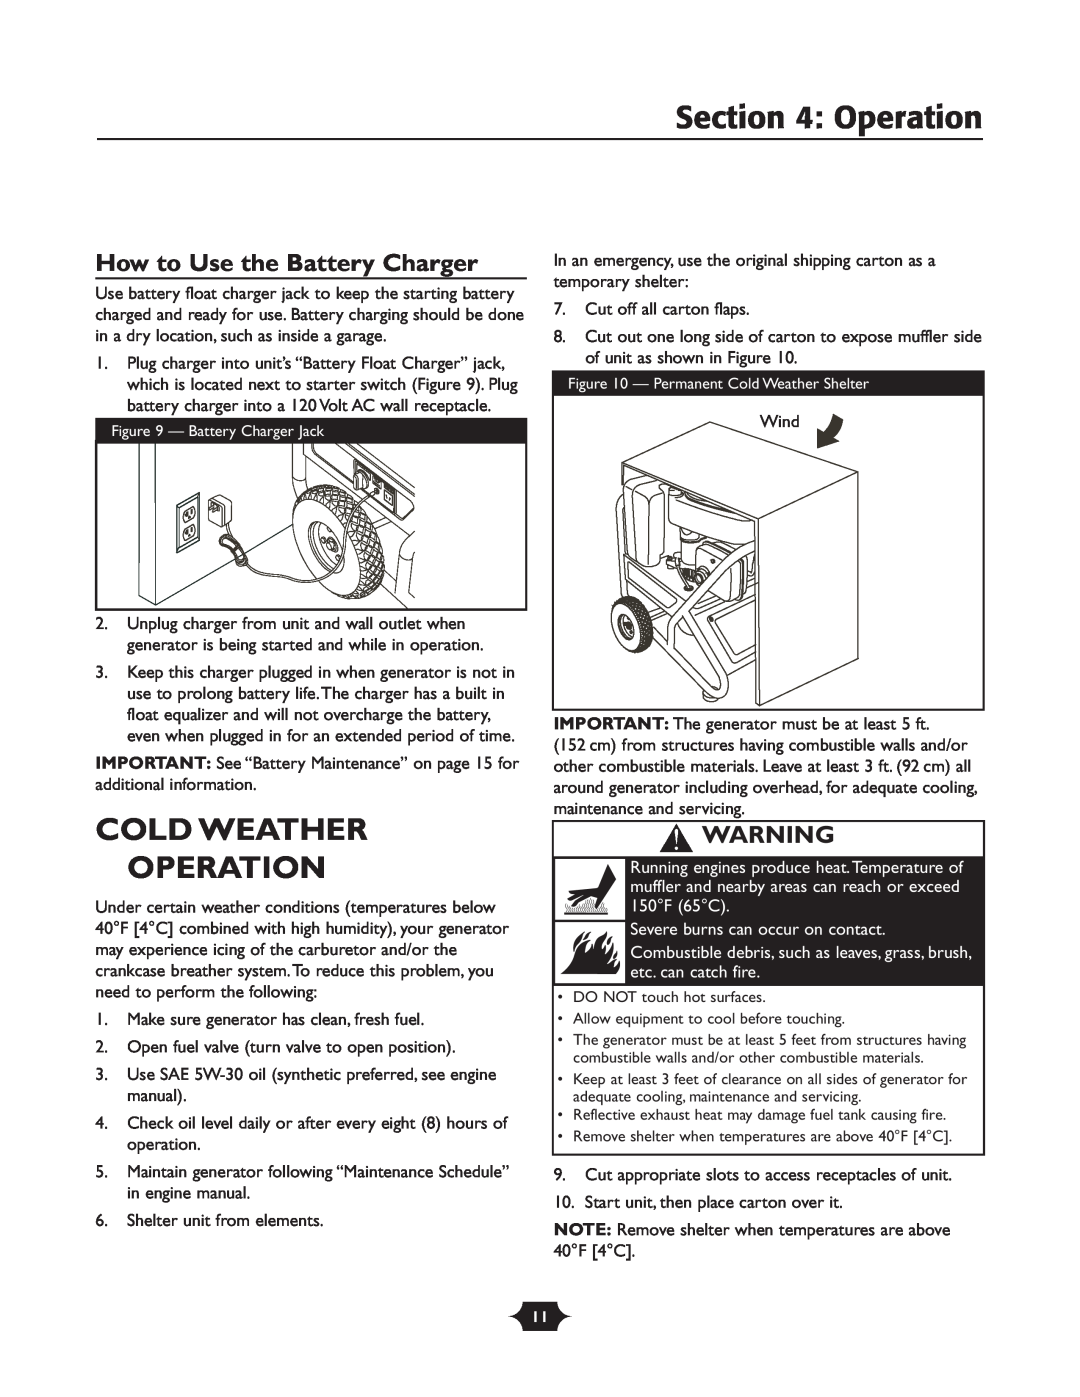 Briggs & Stratton 30237 Cold Weather Operation, How to Use the Battery Charger, Severe burns can occur on contact 